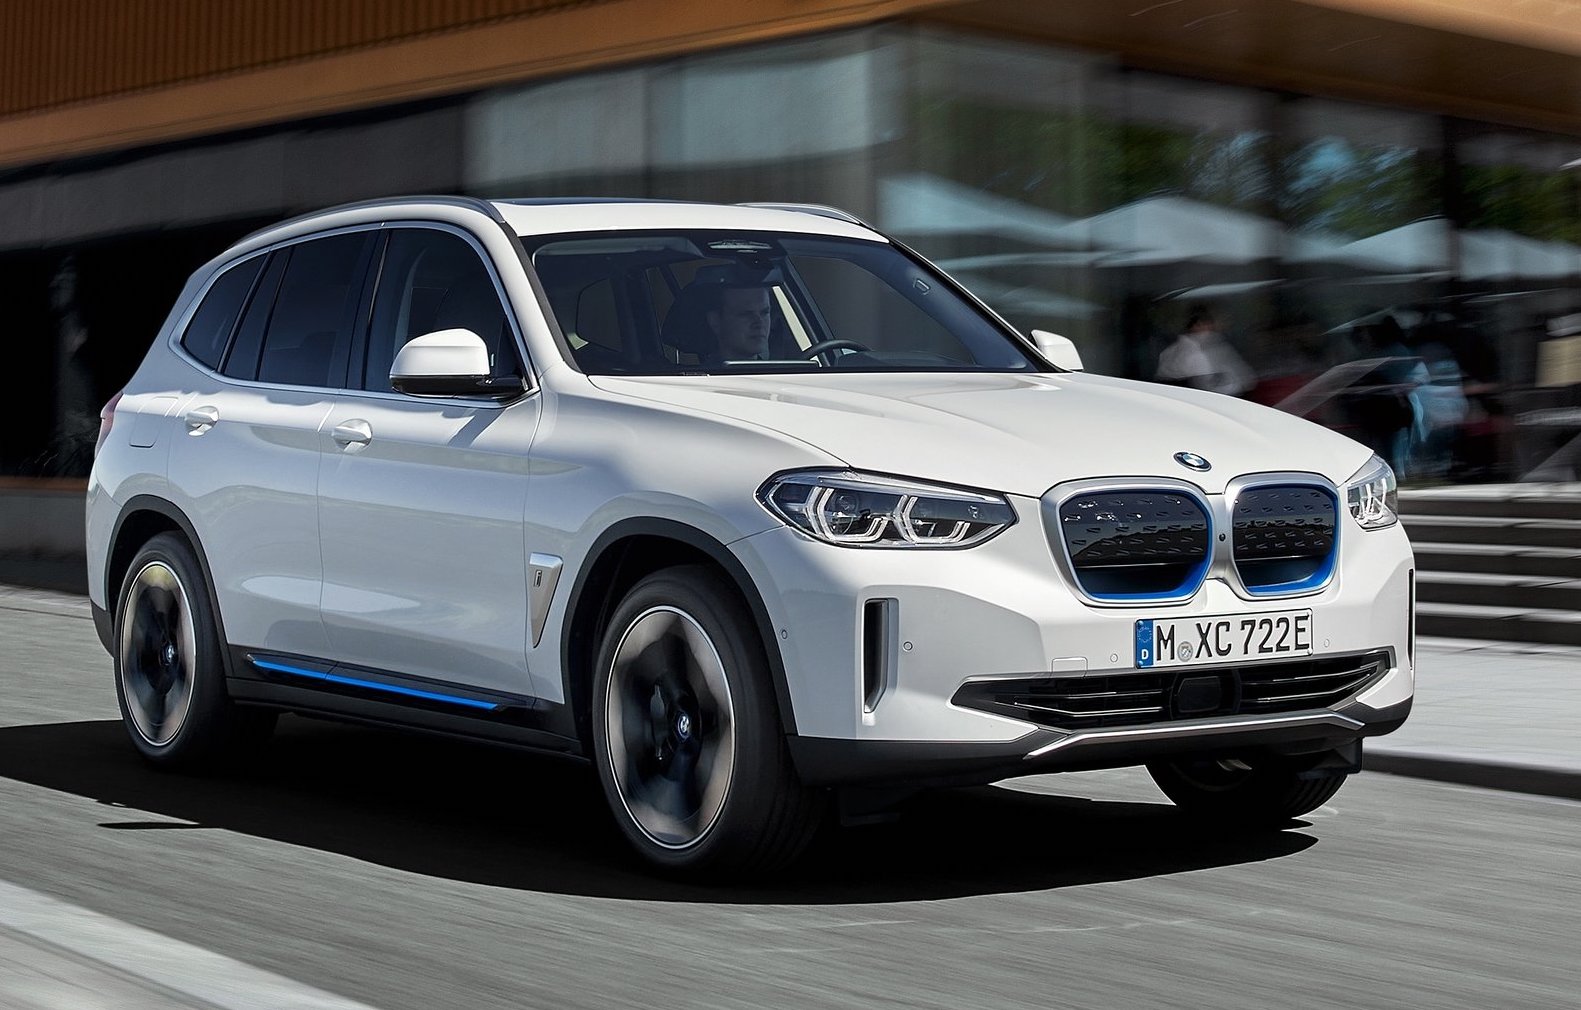 BMW global sales up 33.5% in Q1, up 11% in Australia